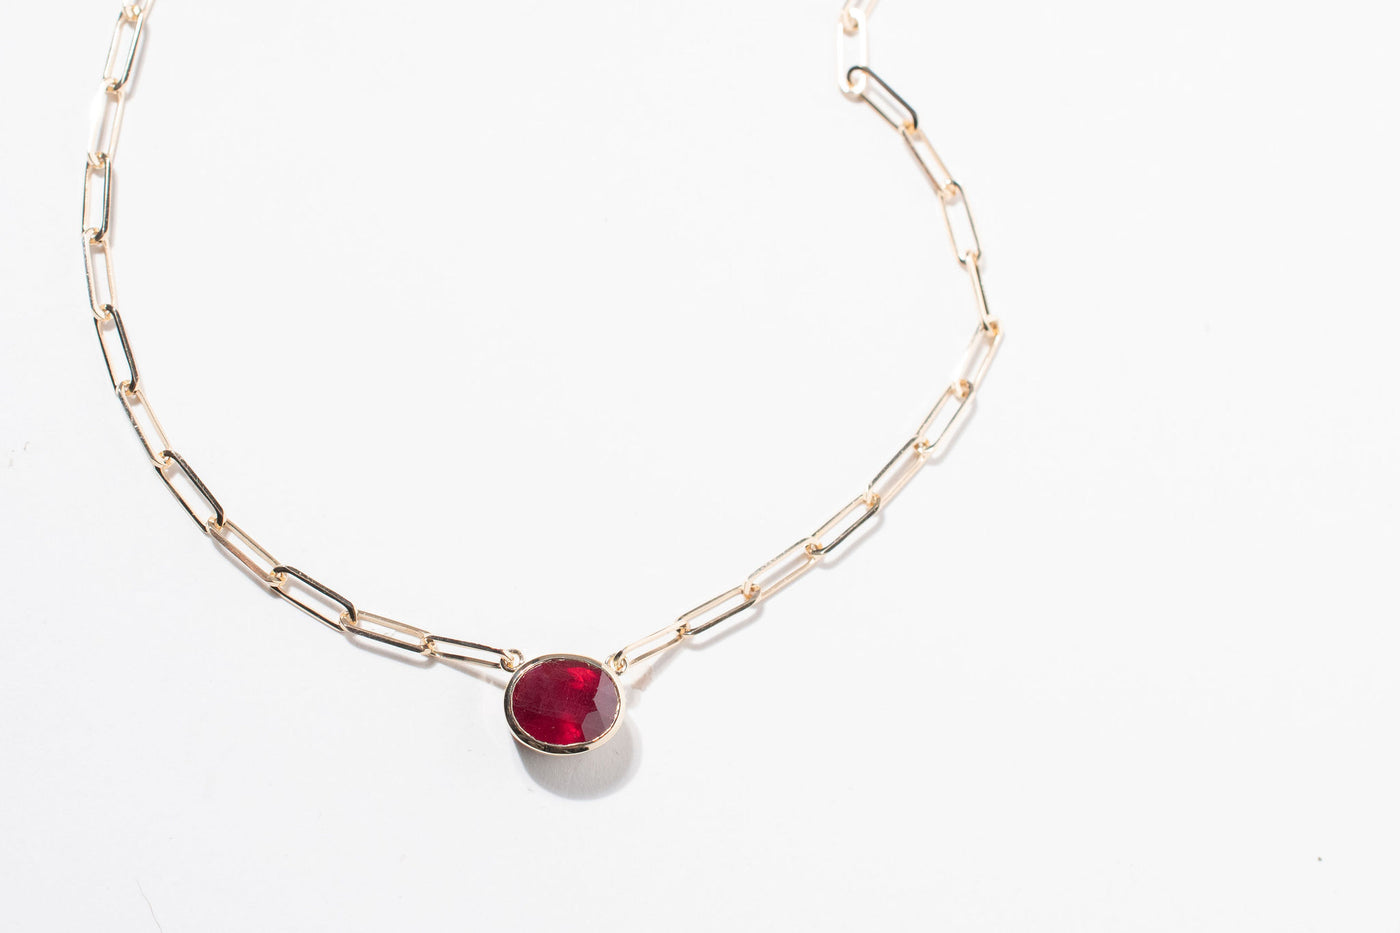 4ct Oval Ruby Necklace - 14k yellow gold